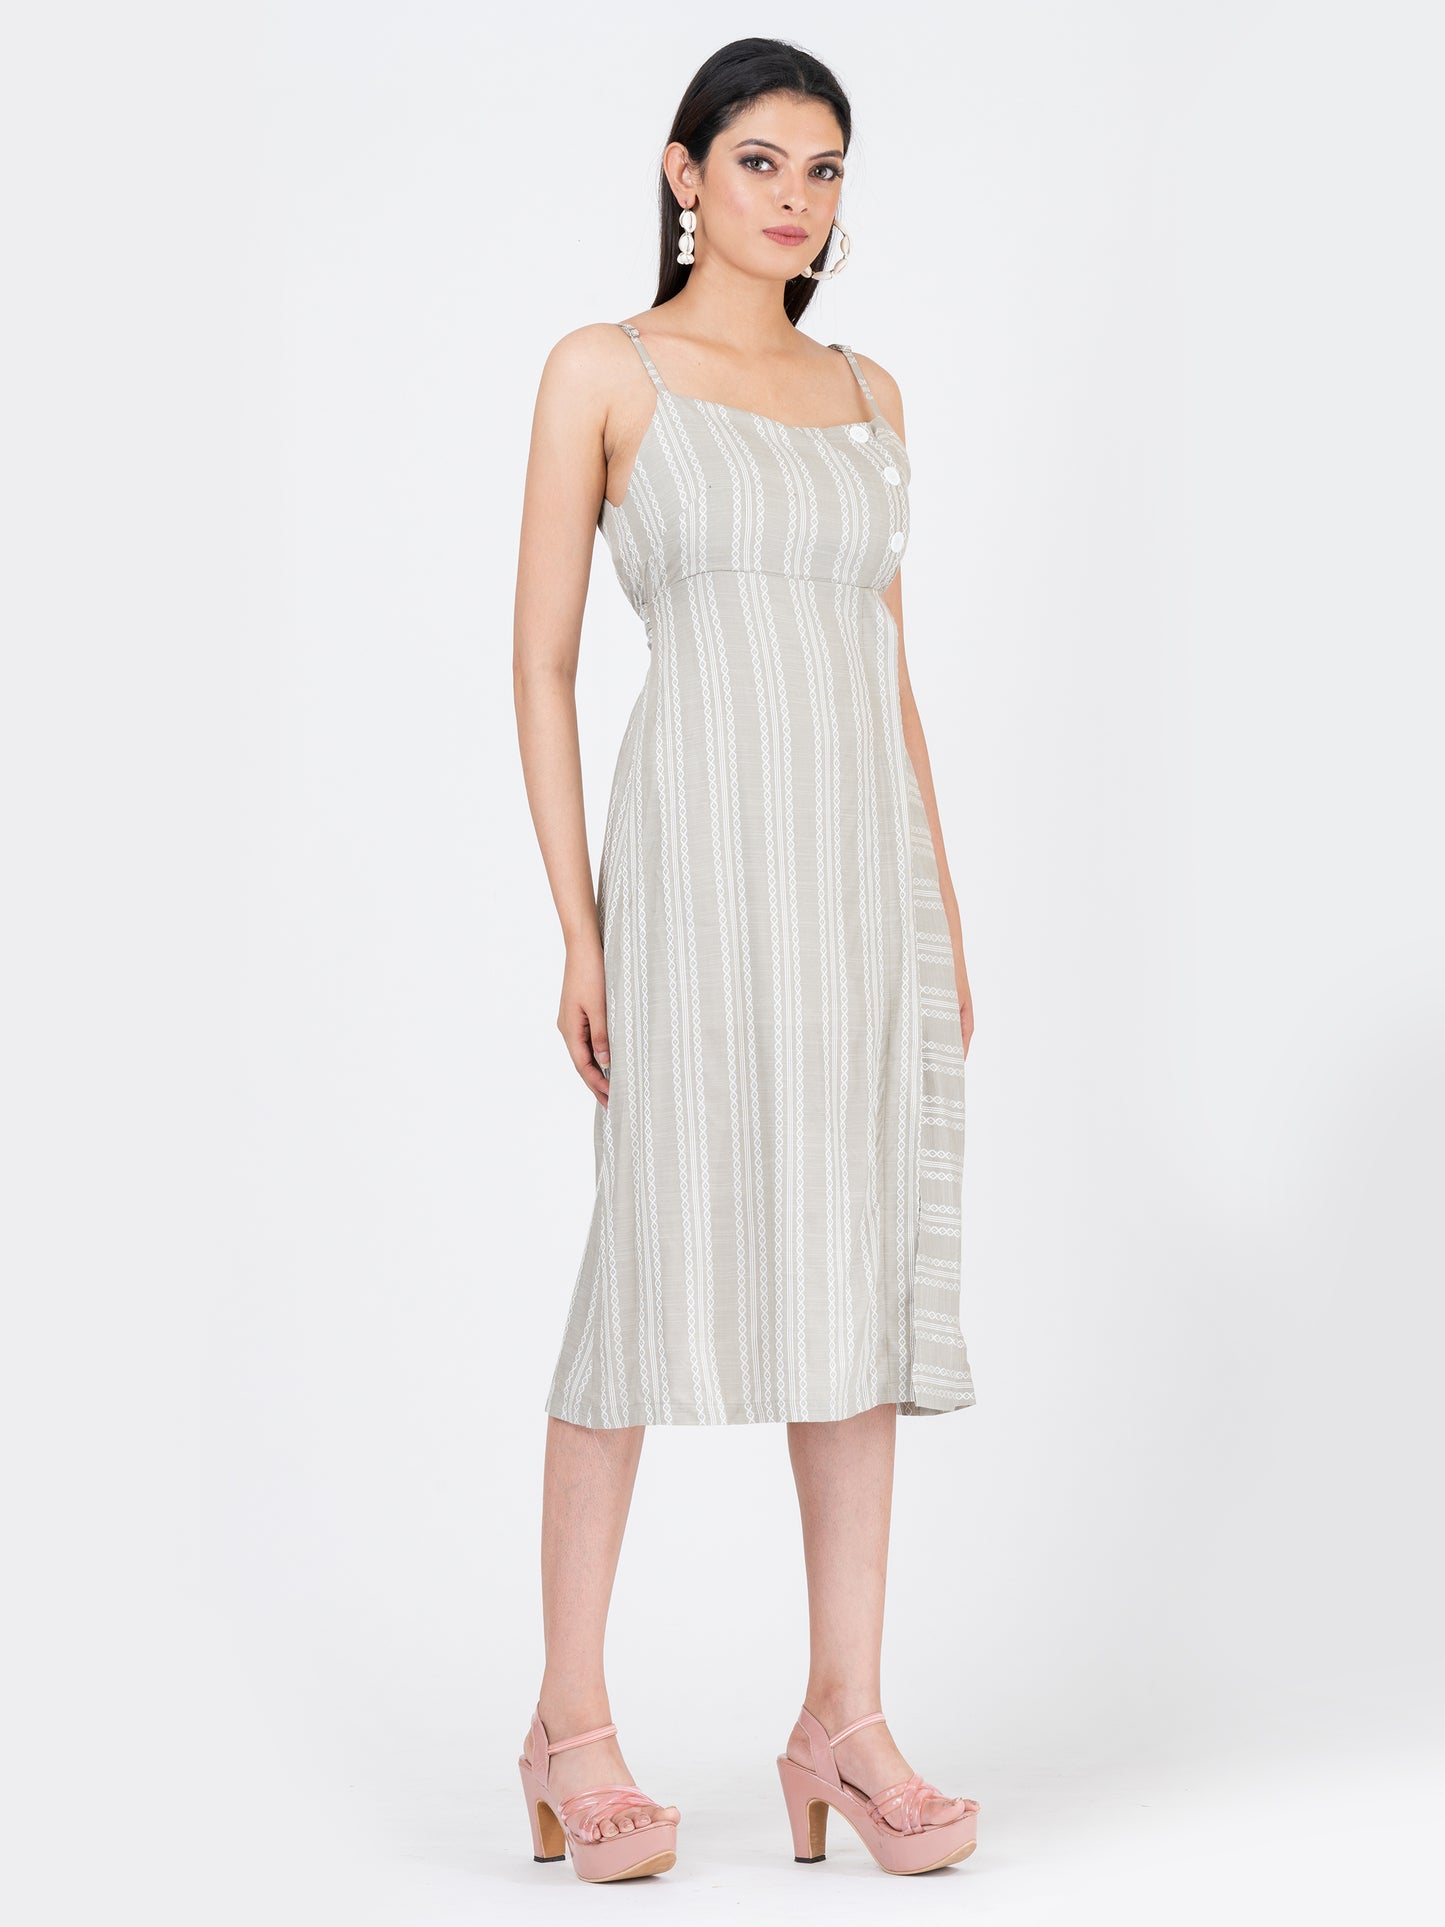 Women’s Soft Cotton Spaghetti Strap Dress With Lining Attached